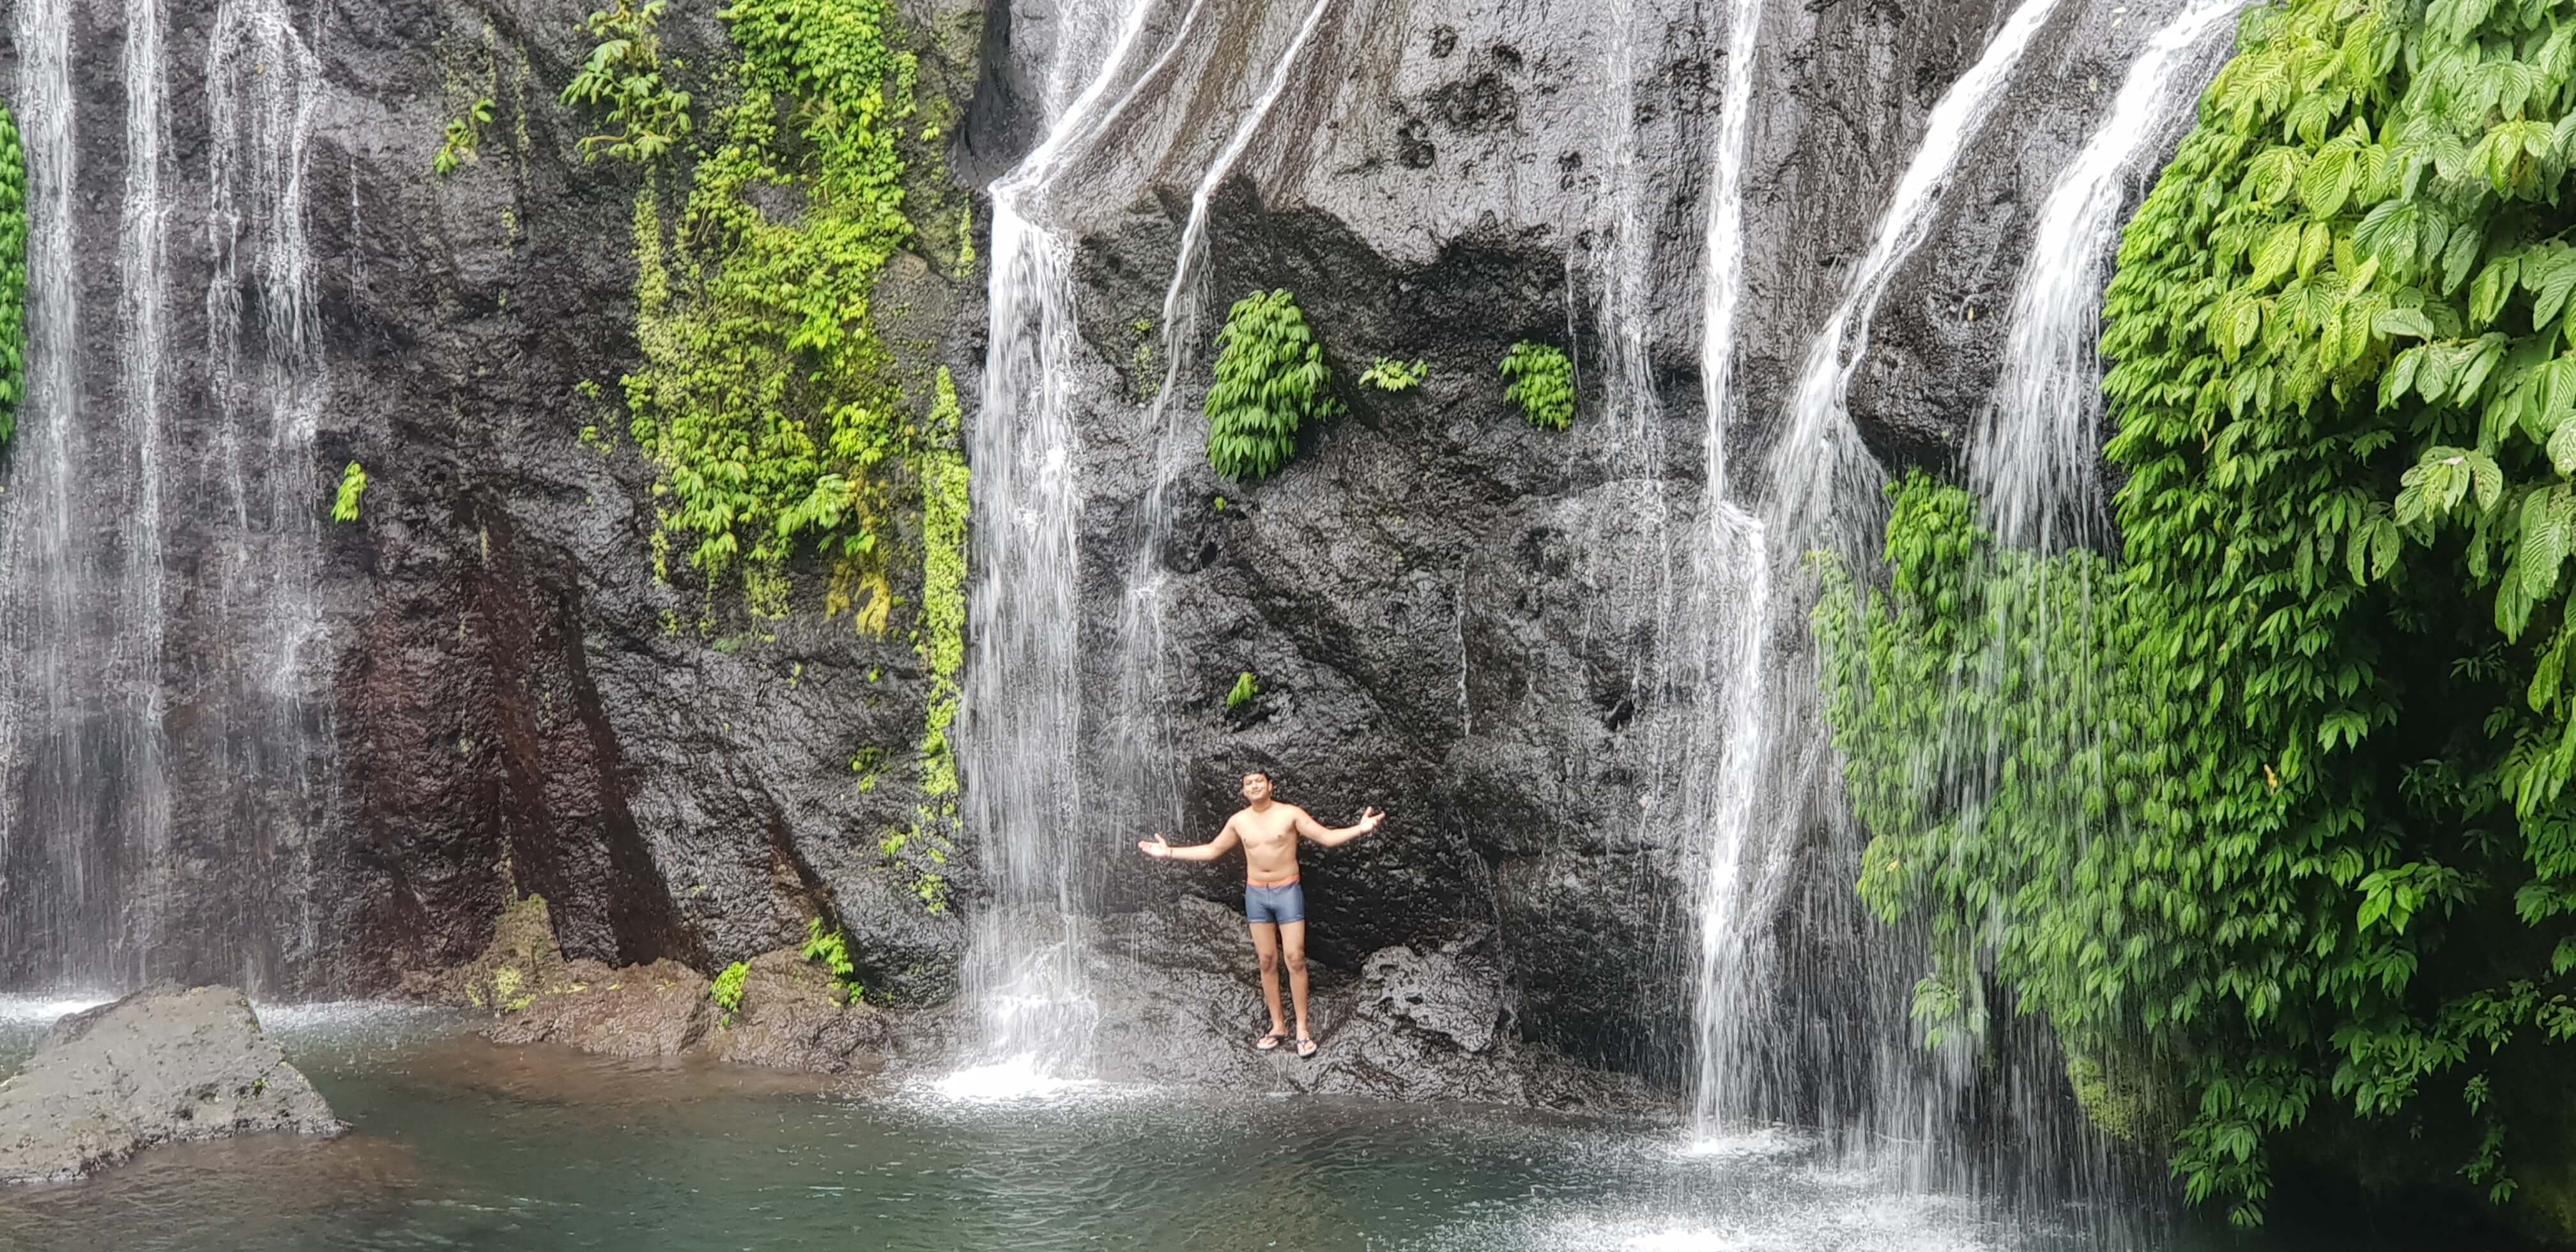 You will thank me for including this waterfall in the Ubud itinerary as it's exclusivity gives you a feeling of owning your own private waterfall